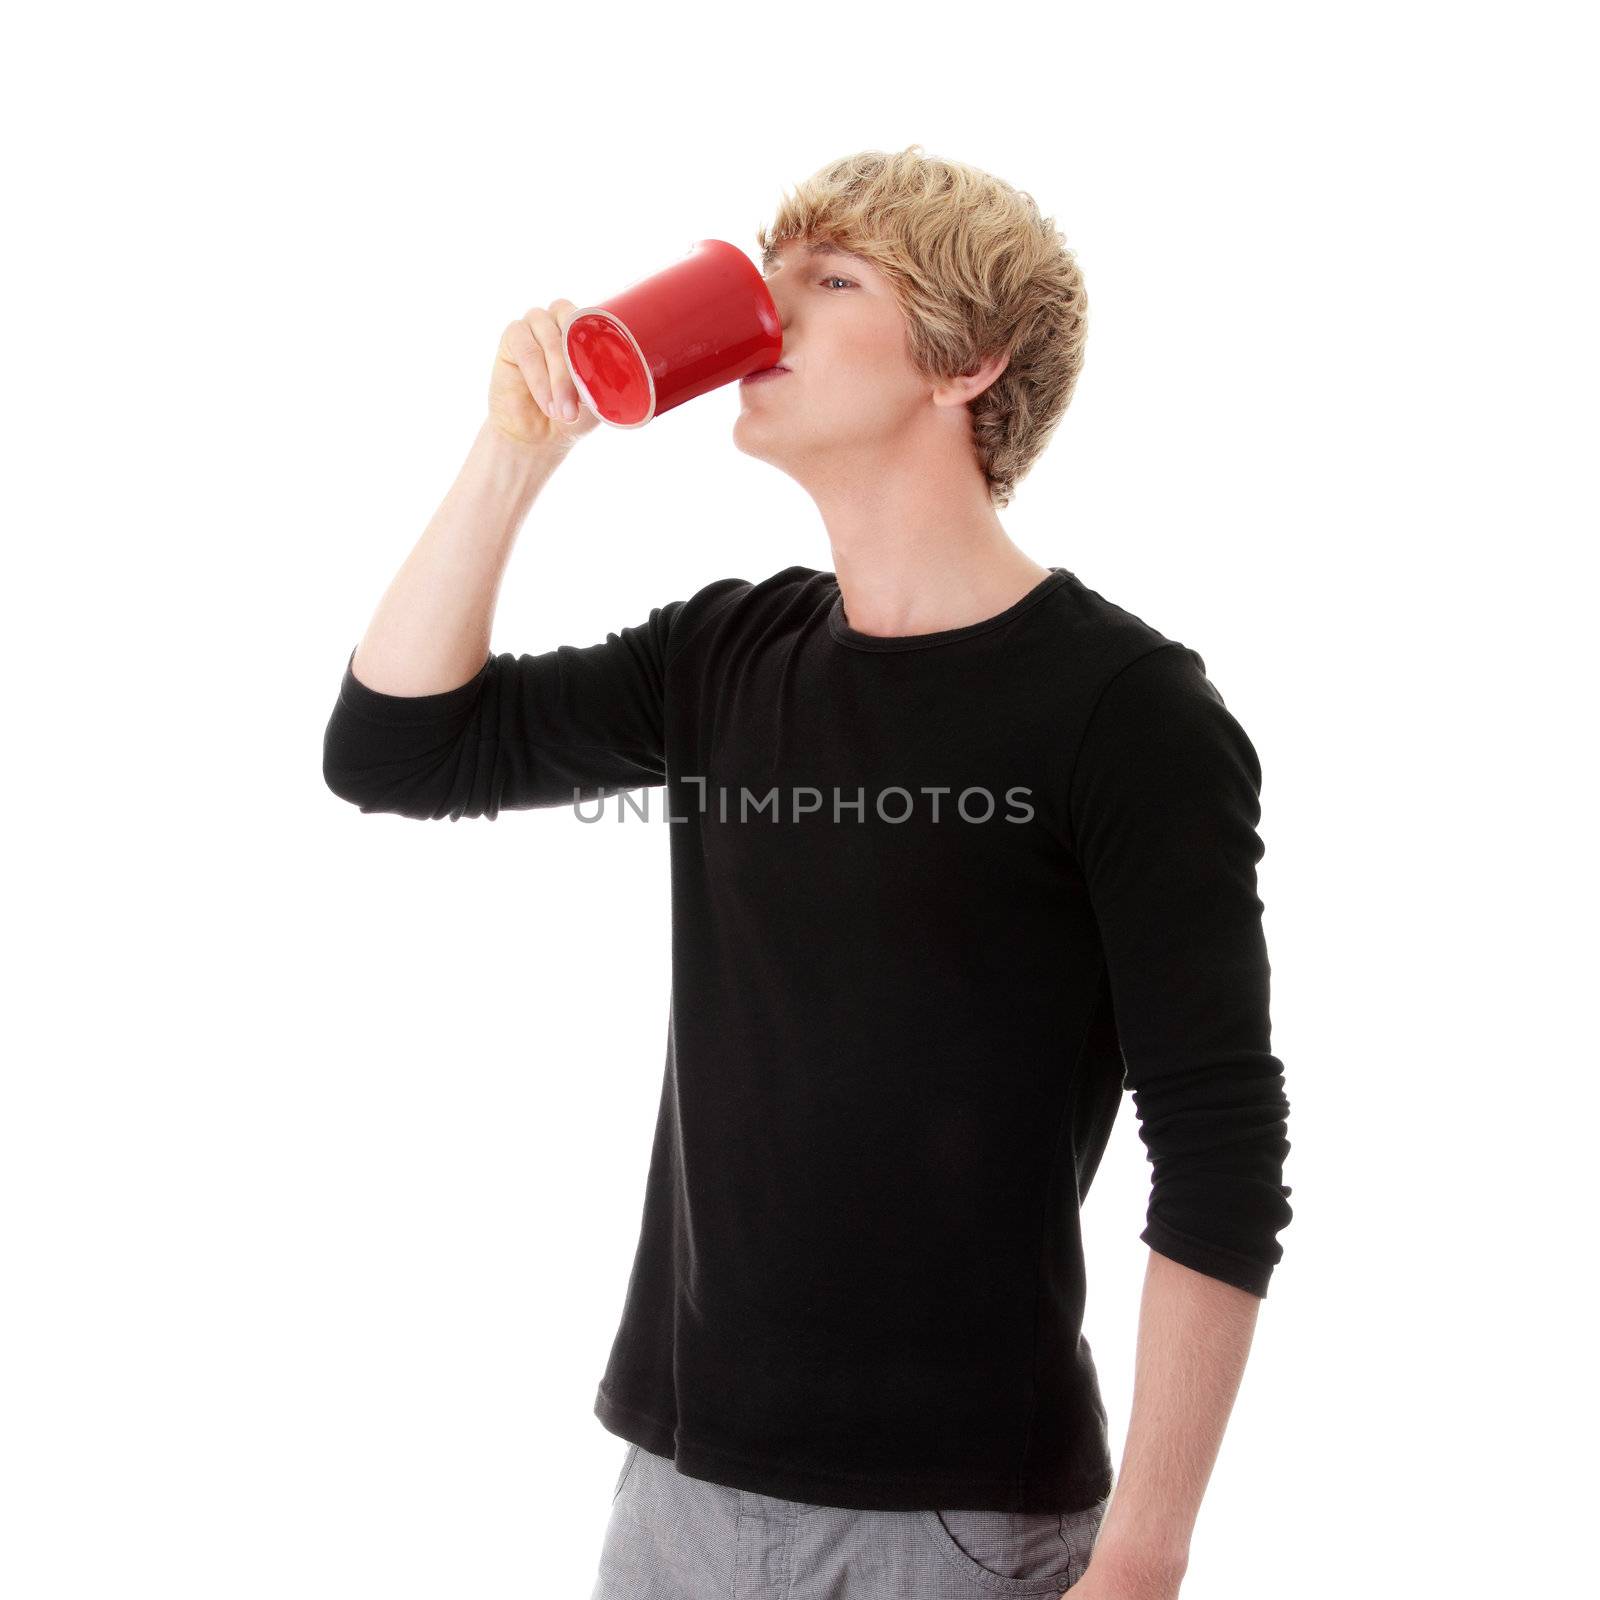 Man drinking a coffee or tea by BDS